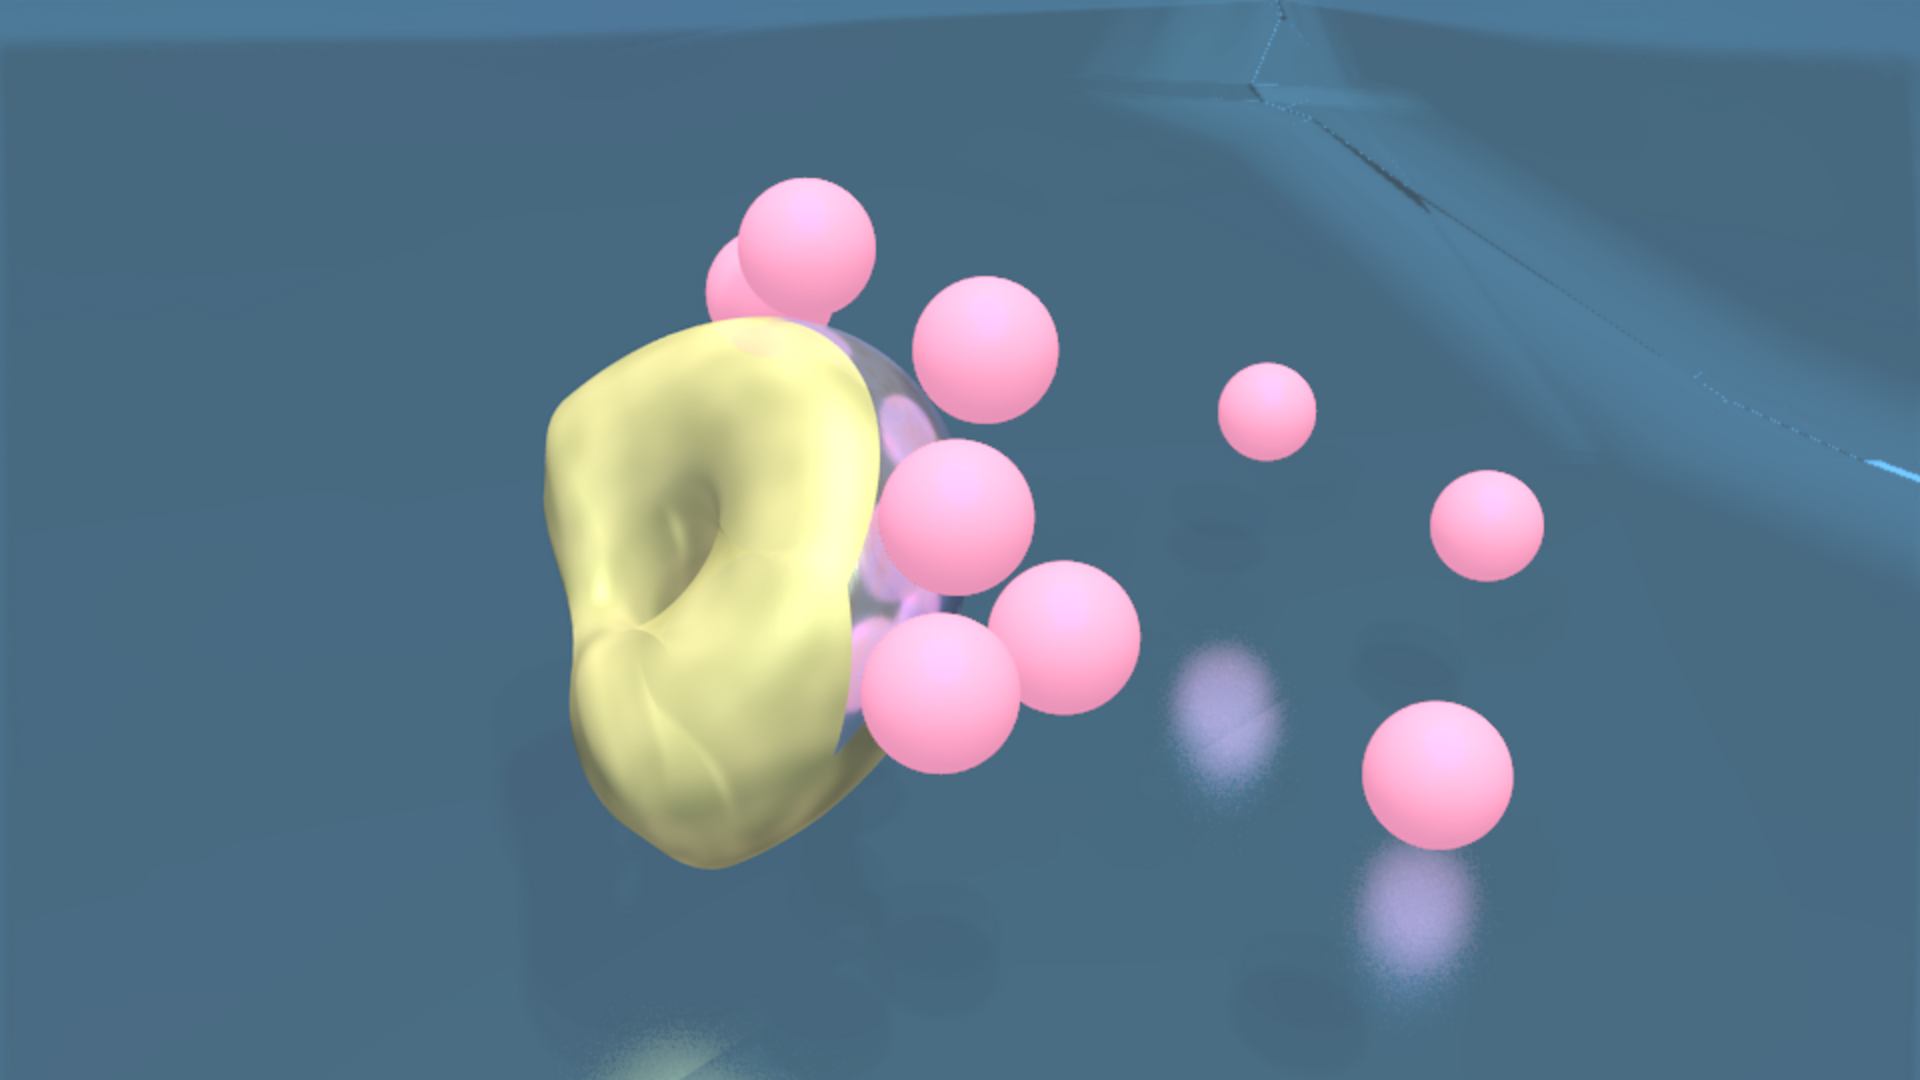 Rendering of the vertically oriented microswimmer with microplastic particles.